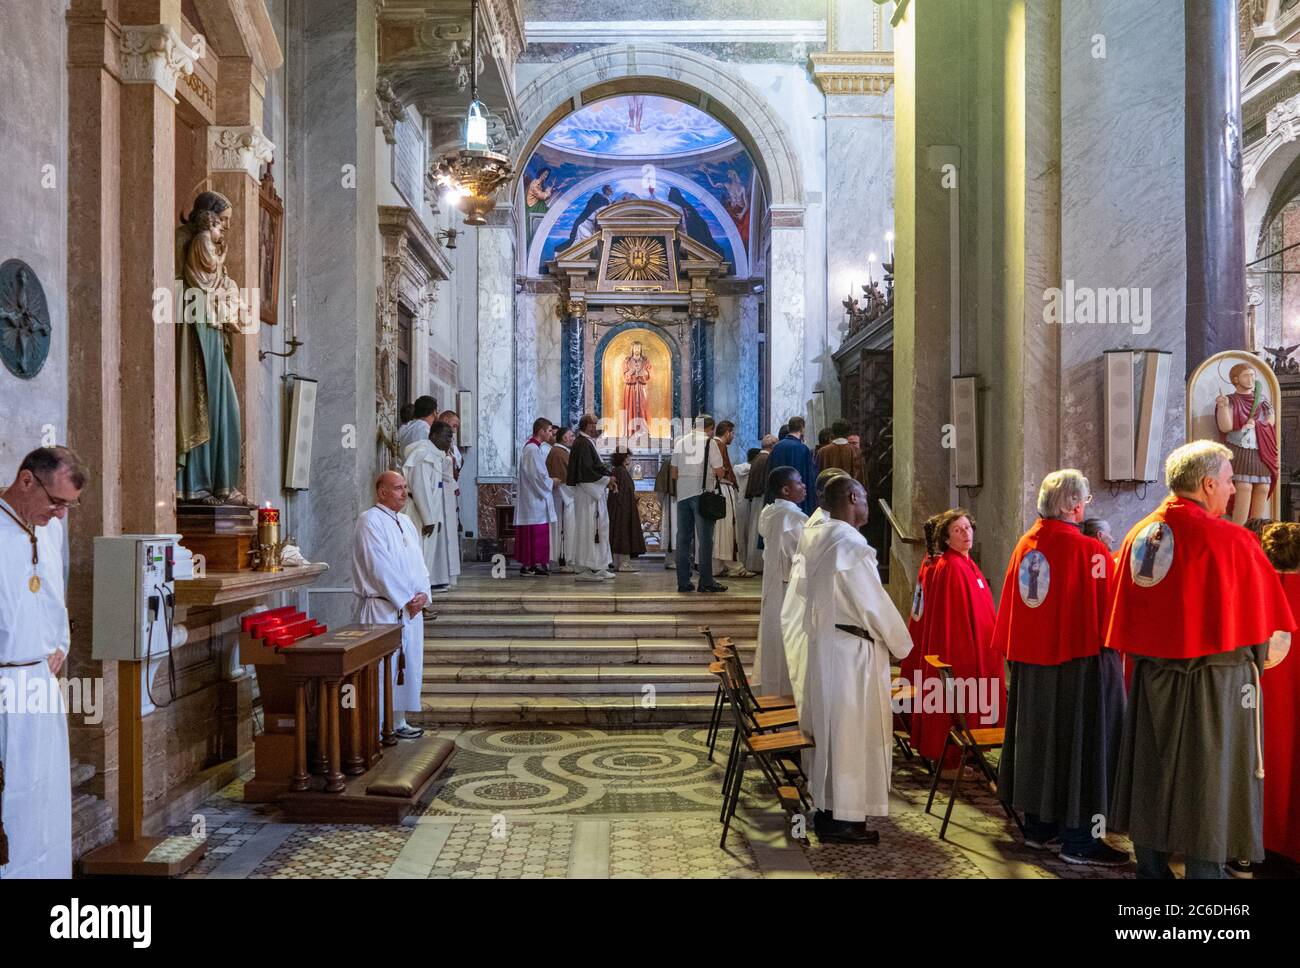 Rome, Italy, Trastevere, manifestations of the religious solemnity known as the Madonna de Noantri in the San Crisogono basilica Stock Photo